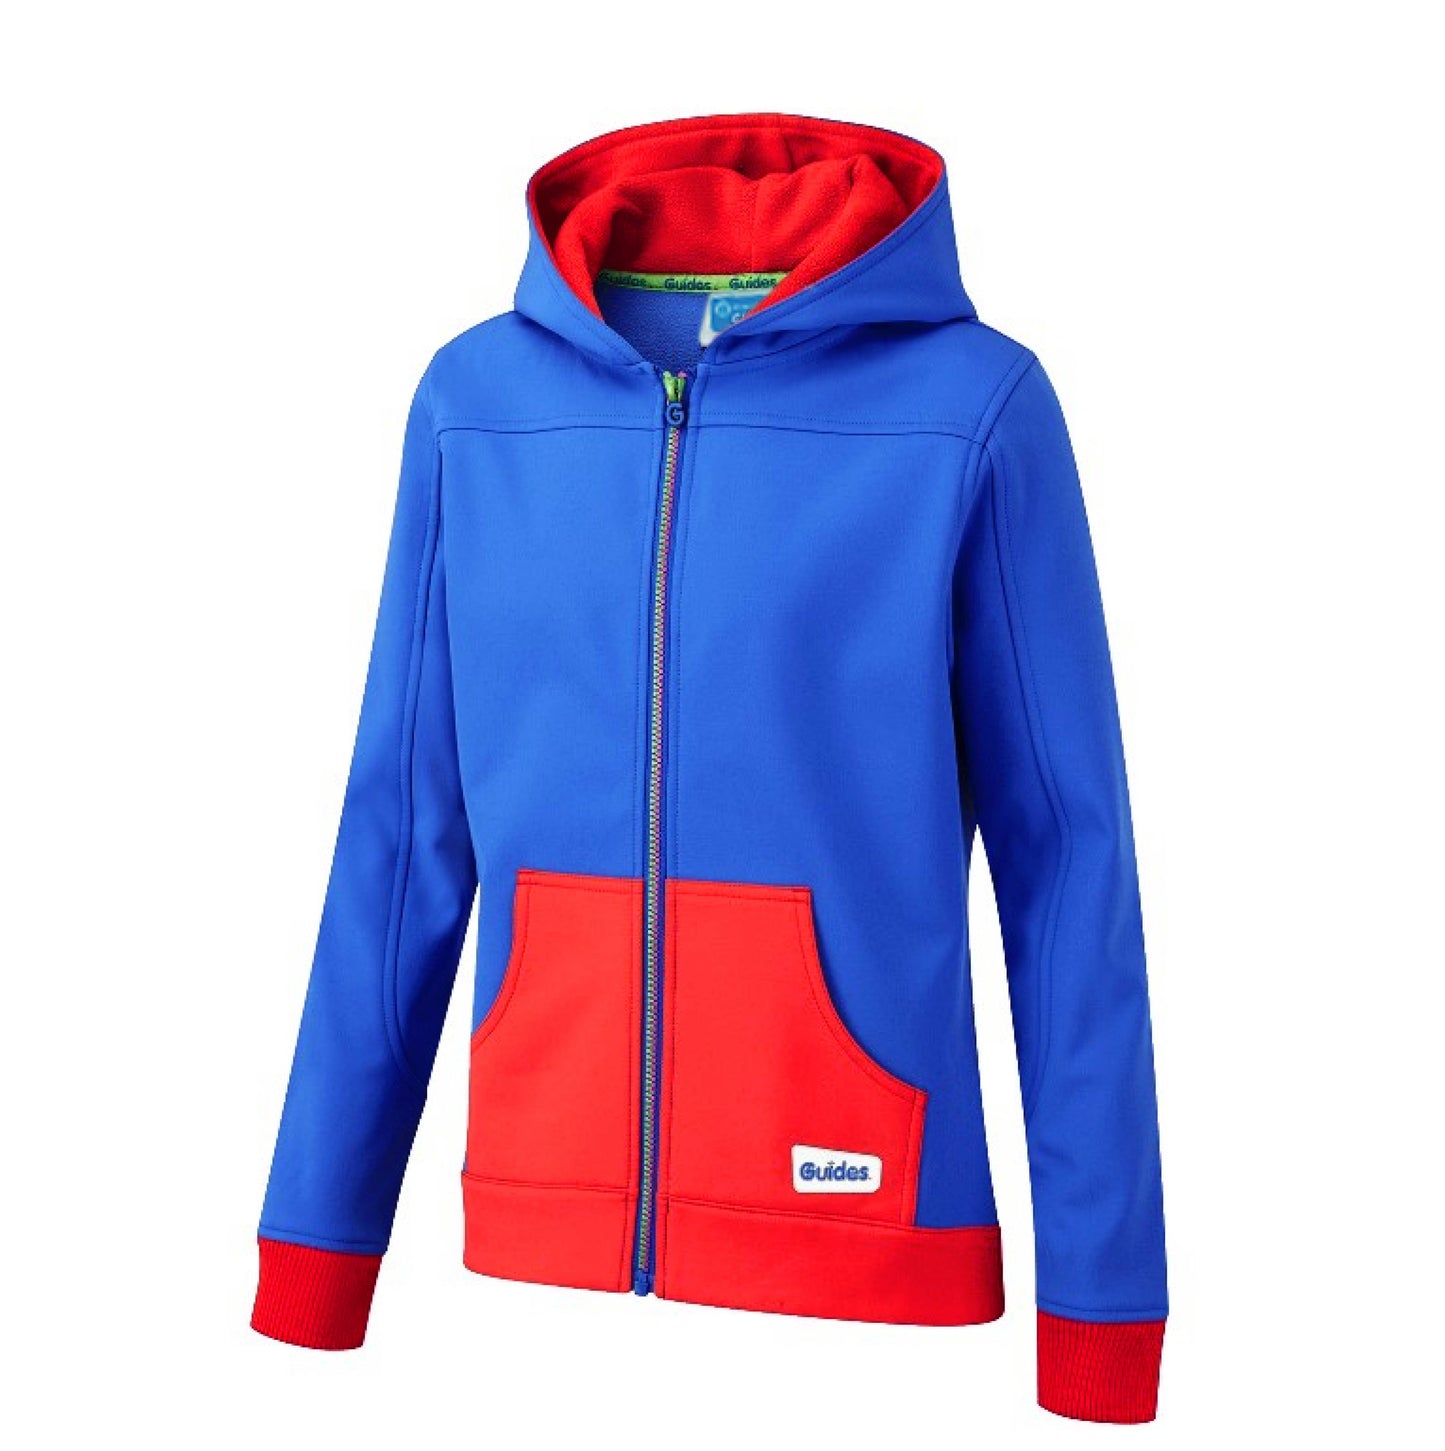 GUIDES HOODED TOP